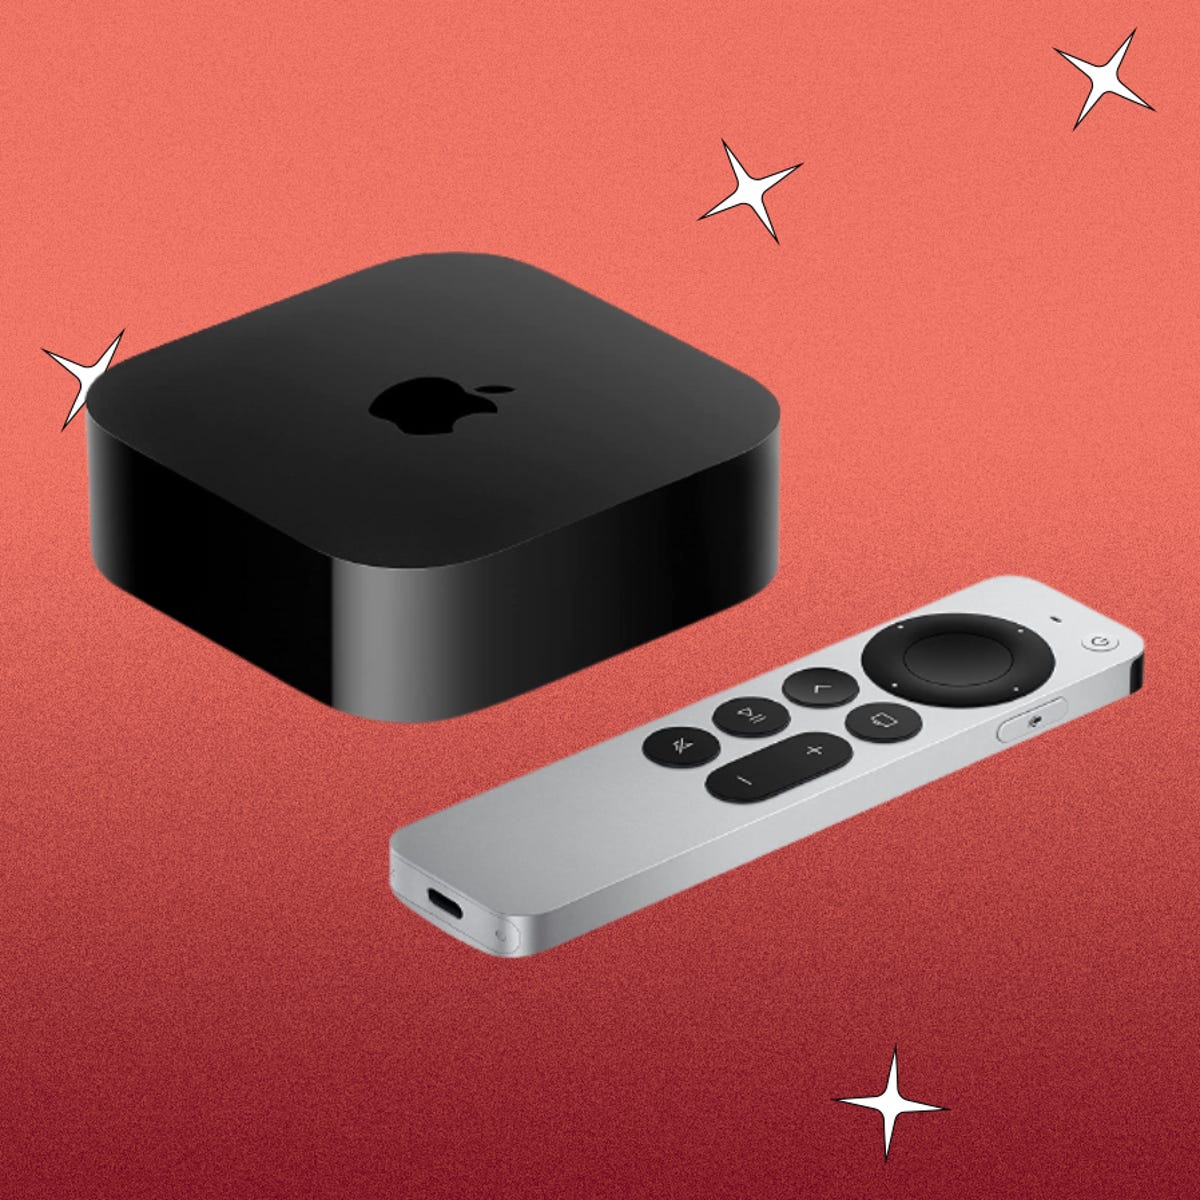 Apple TV 4K (2022) Deals: Get Discounts and Free Services - CNET